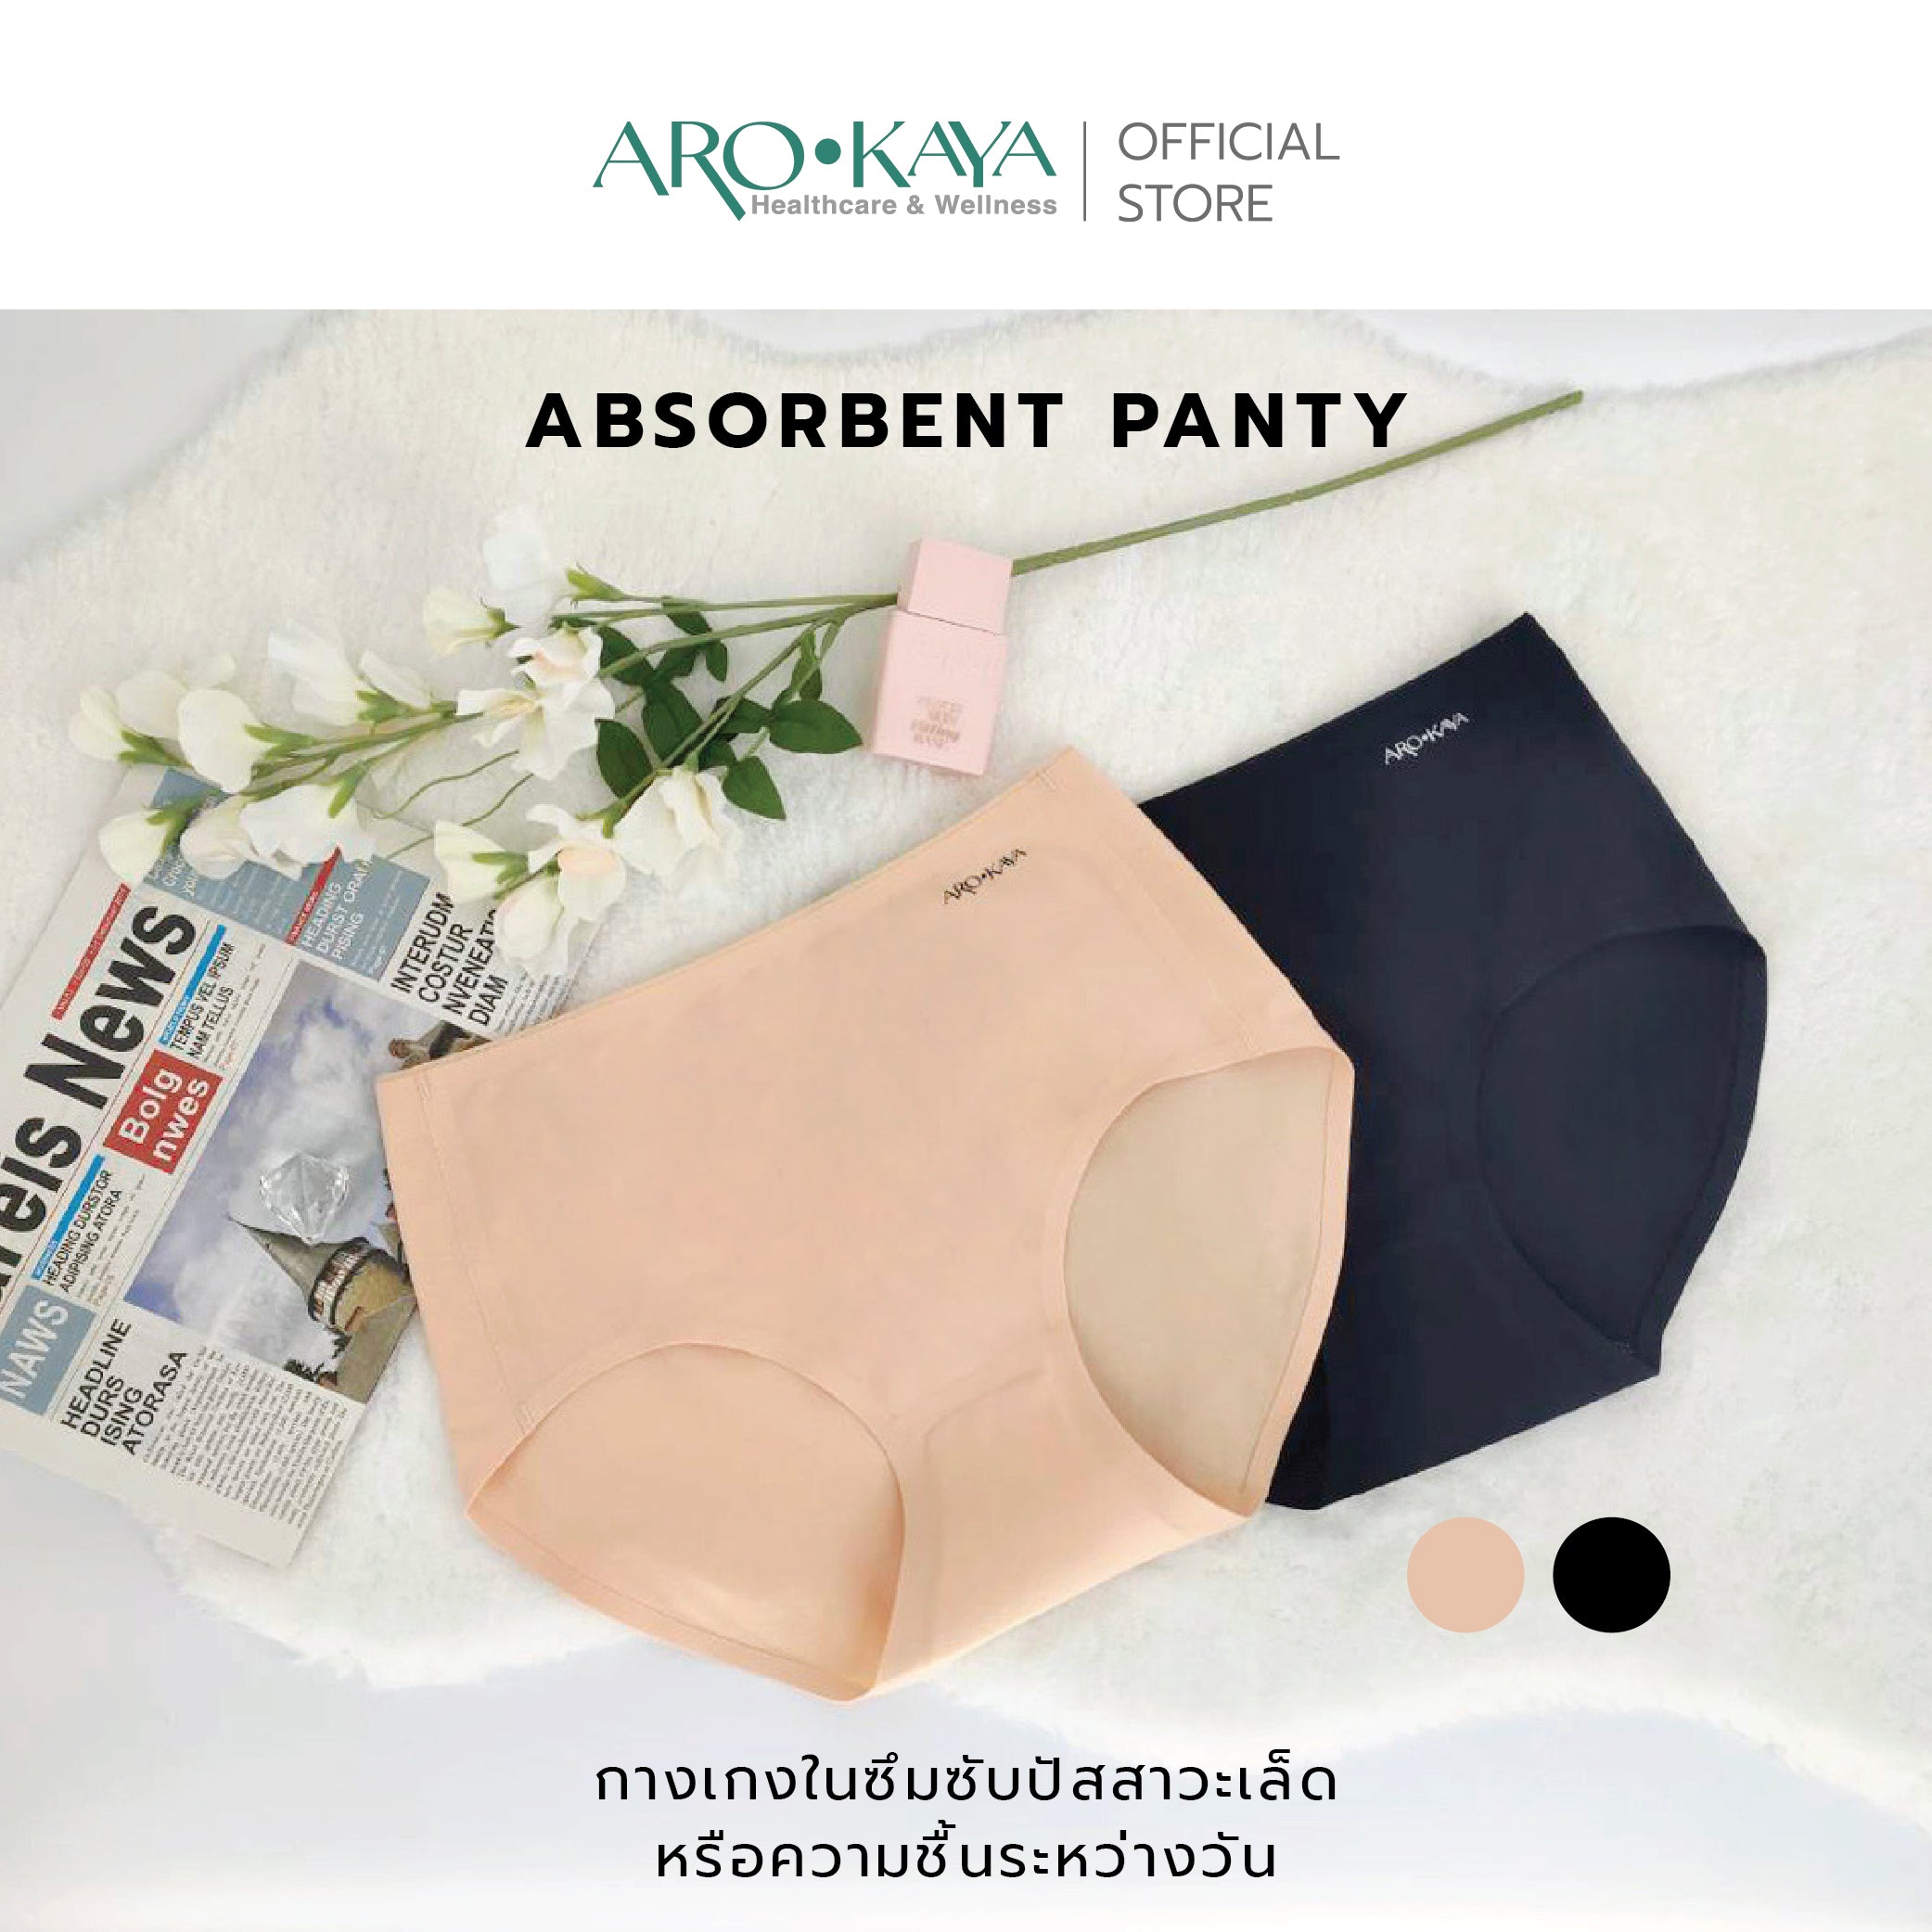 ABSORBENT PANTY